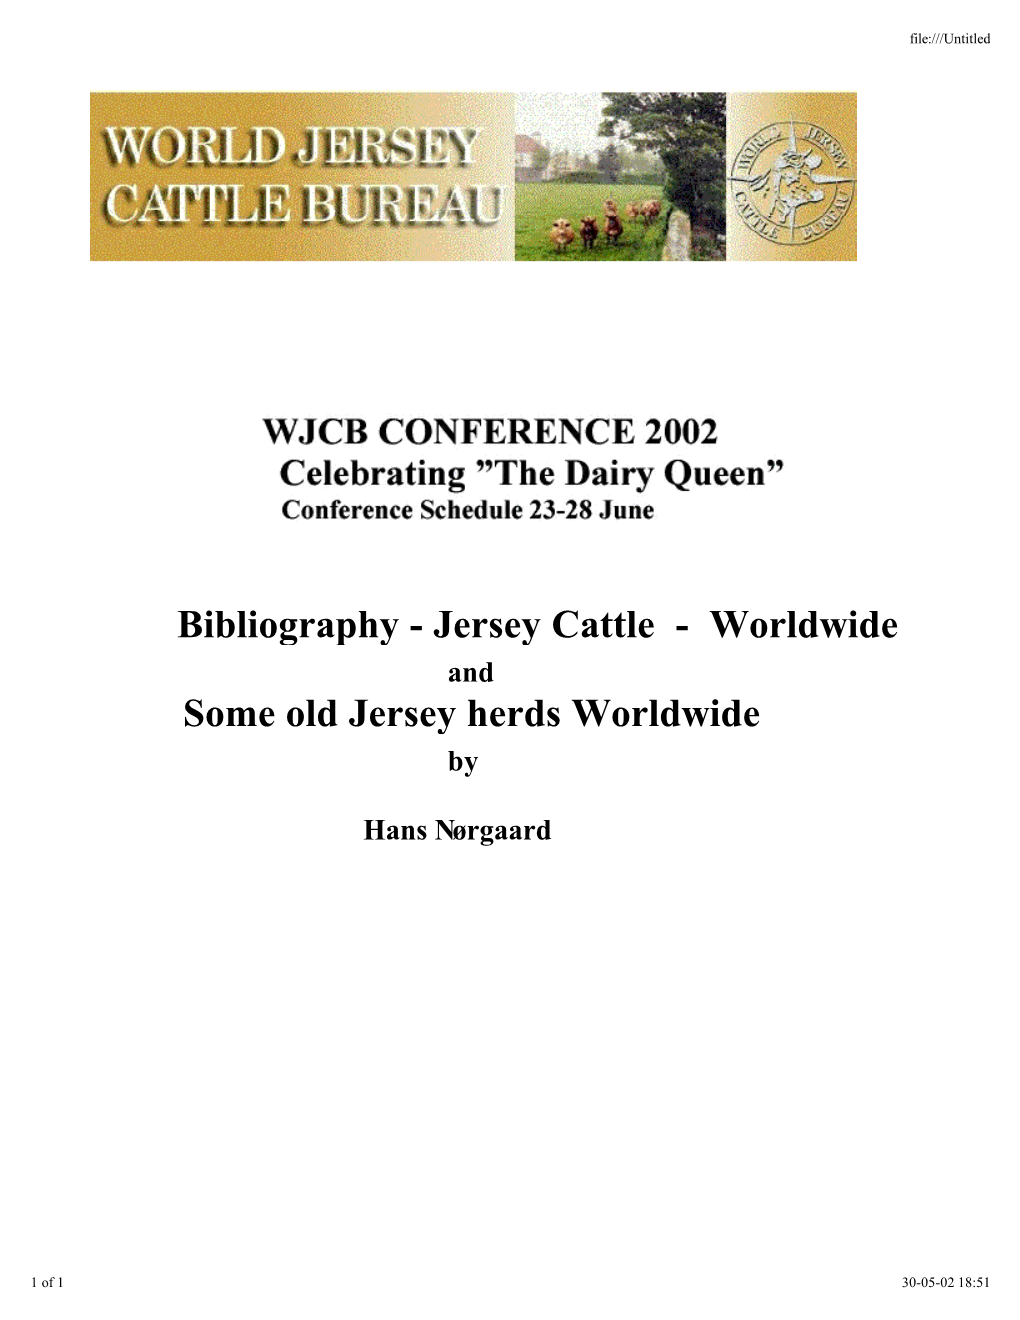 Bibliography - Jersey Cattle - Worldwide and Some Old Jersey Herds Worldwide By